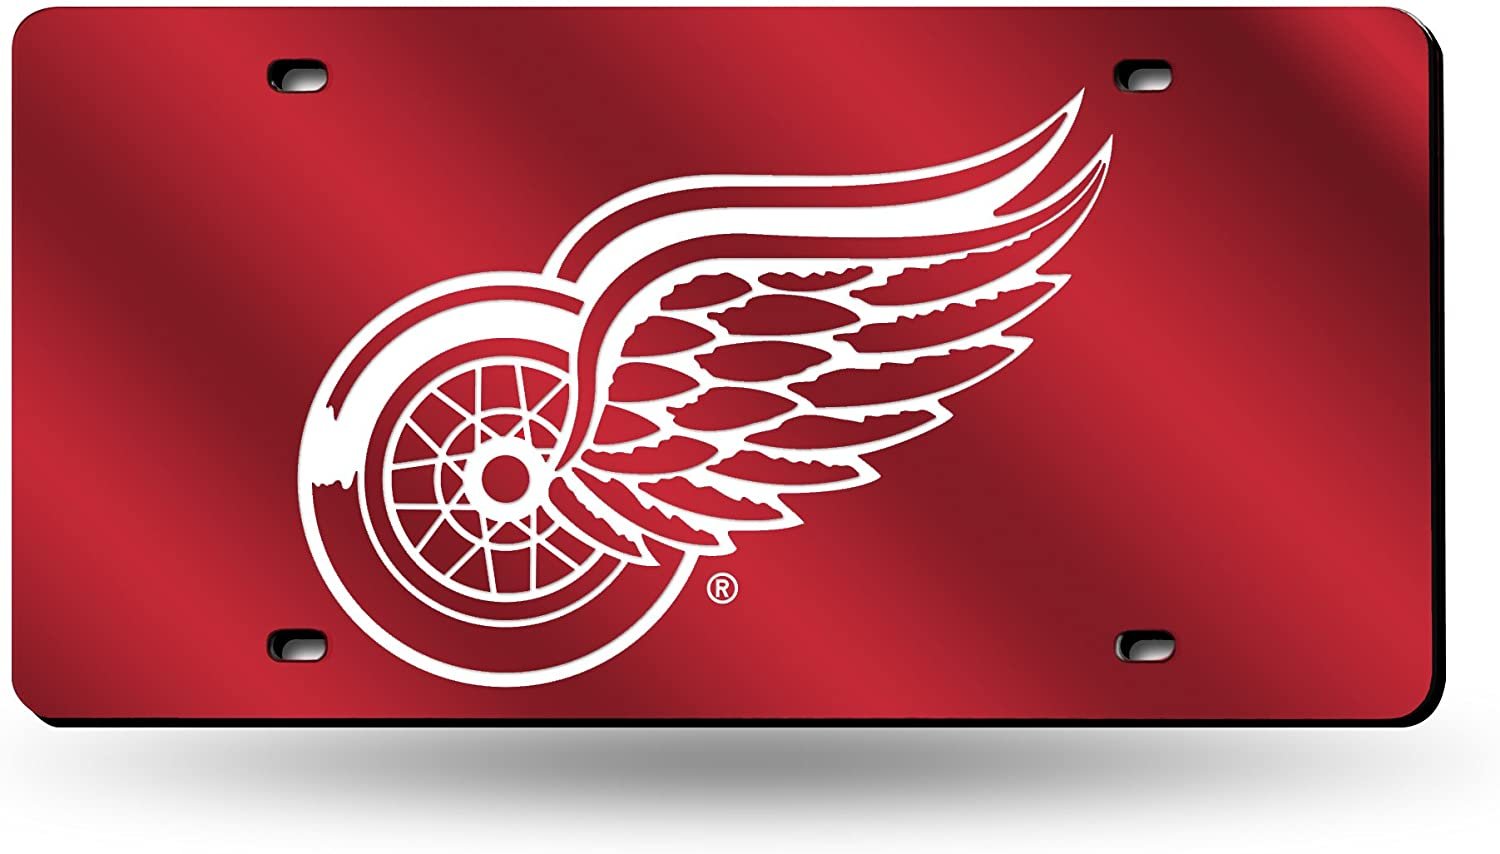 Detroit Red Wings Premium Laser Cut Tag License Plate, Red Mirrored Acrylic Inlaid, 12x6 Inch